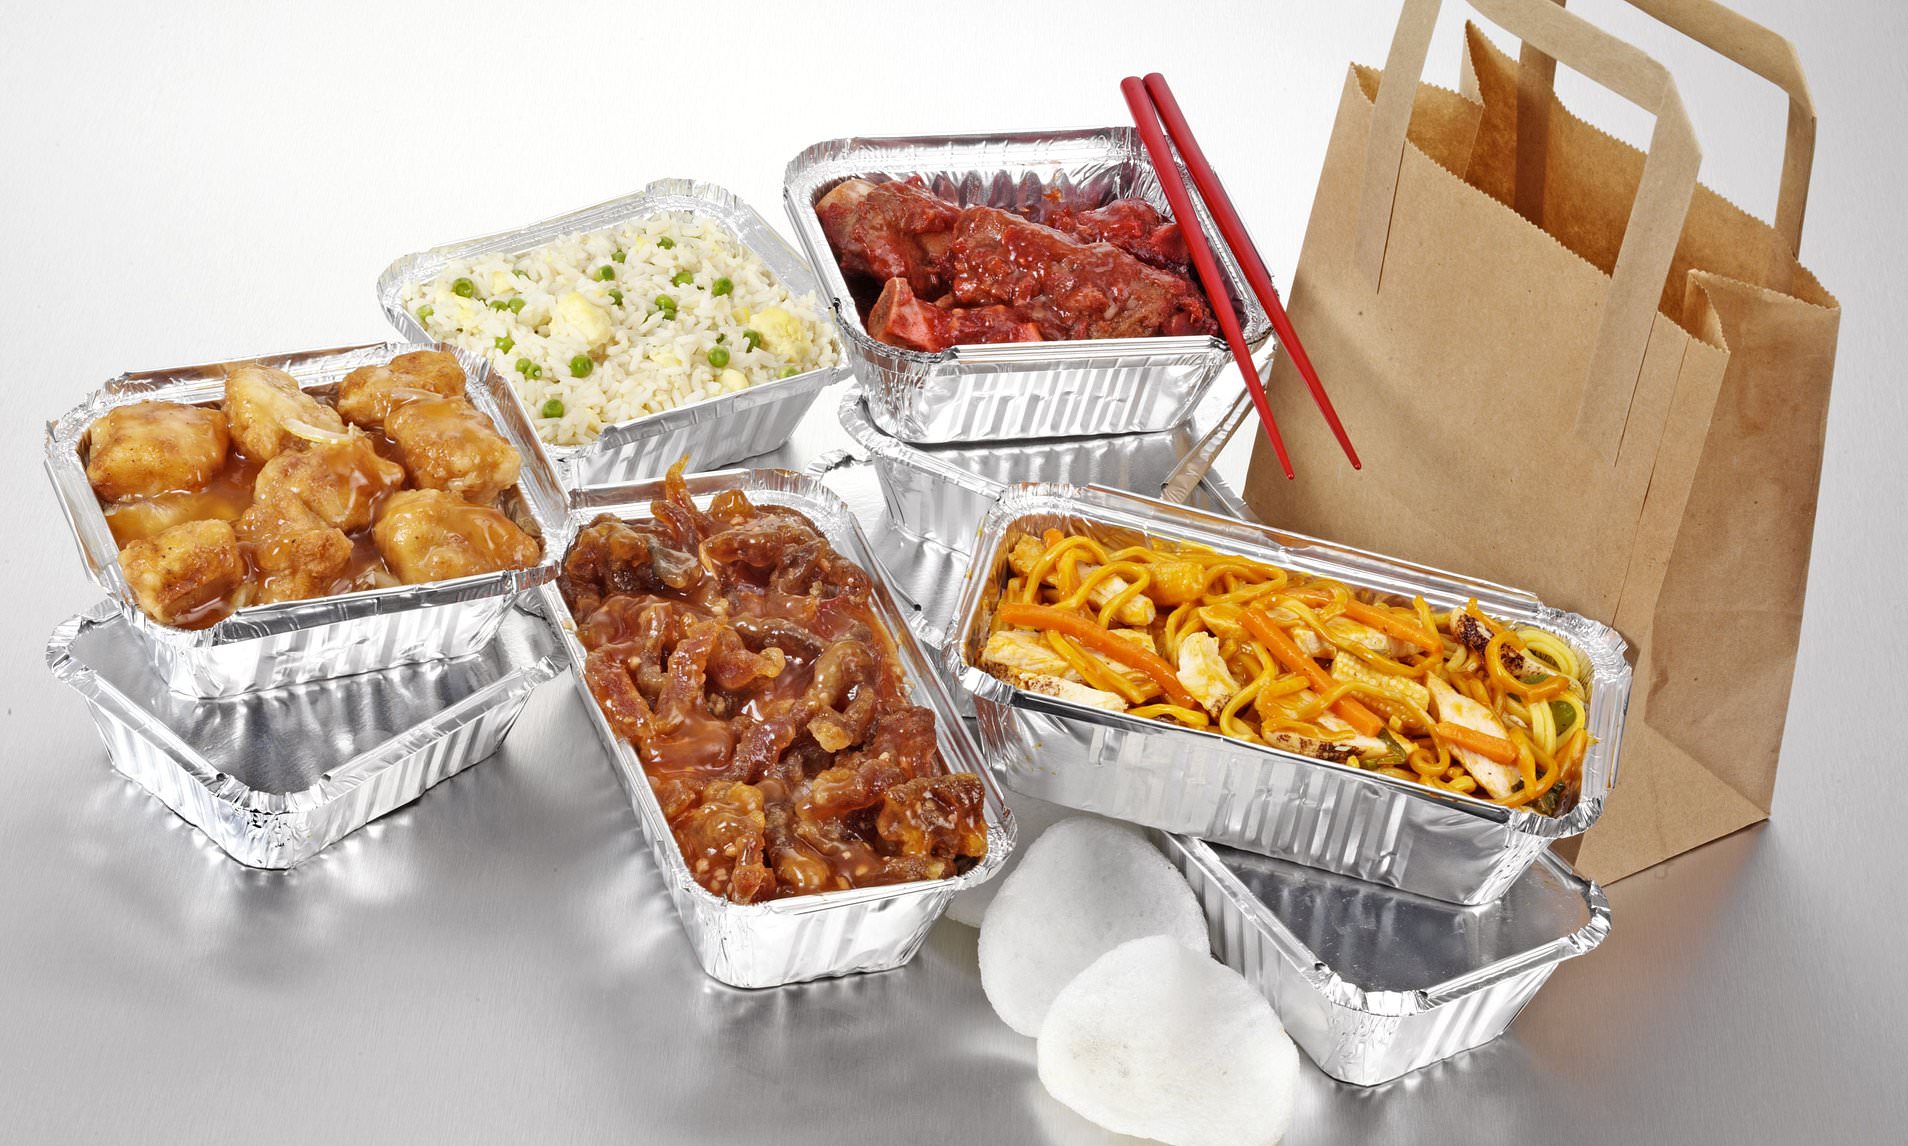 FRIDAY IS THE NIGHT FOR A TAKEAWAY!